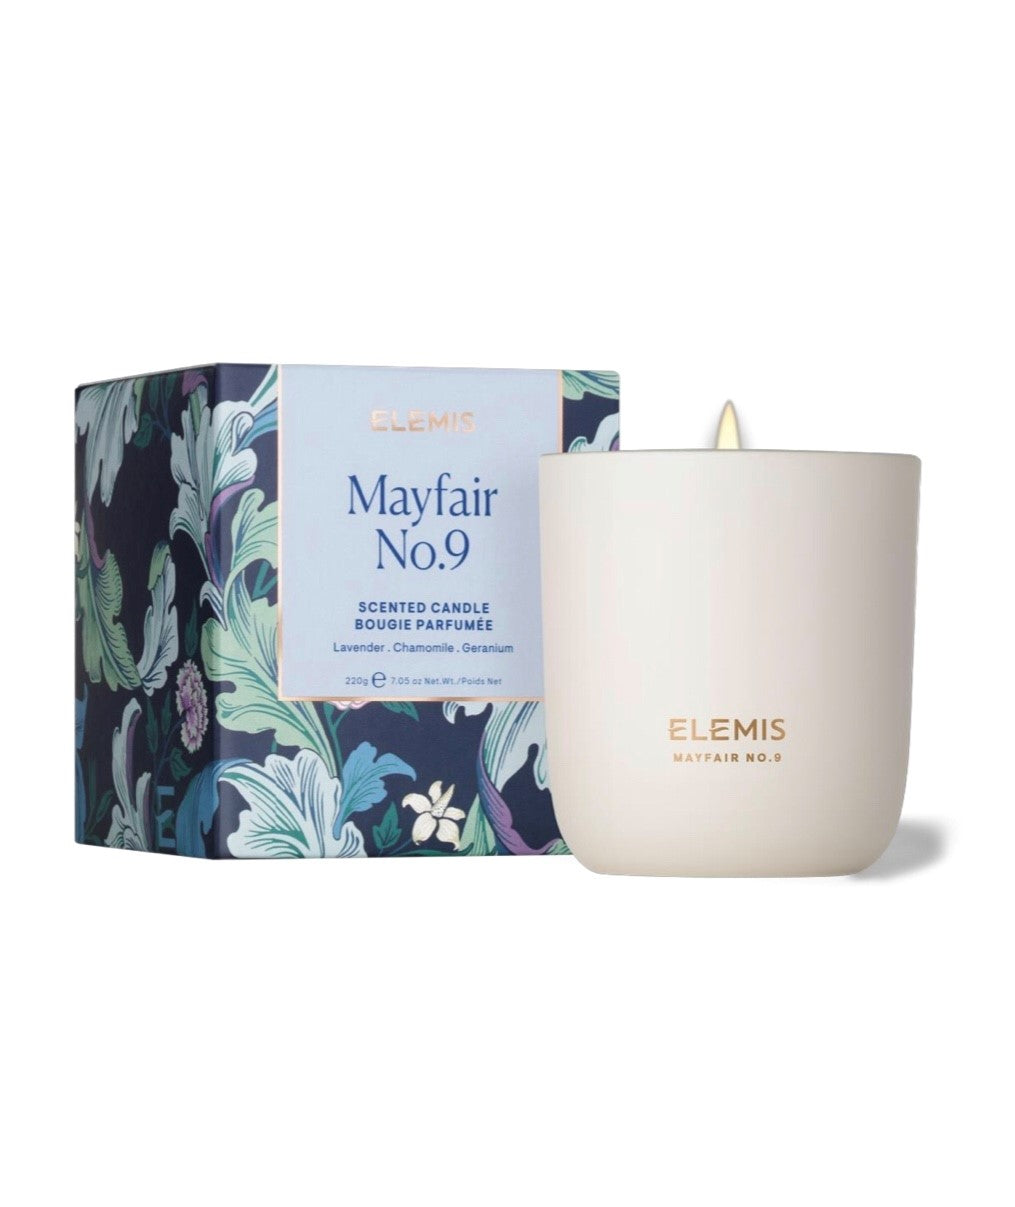 ELEMIS Mayfair No.9 Scented Candle